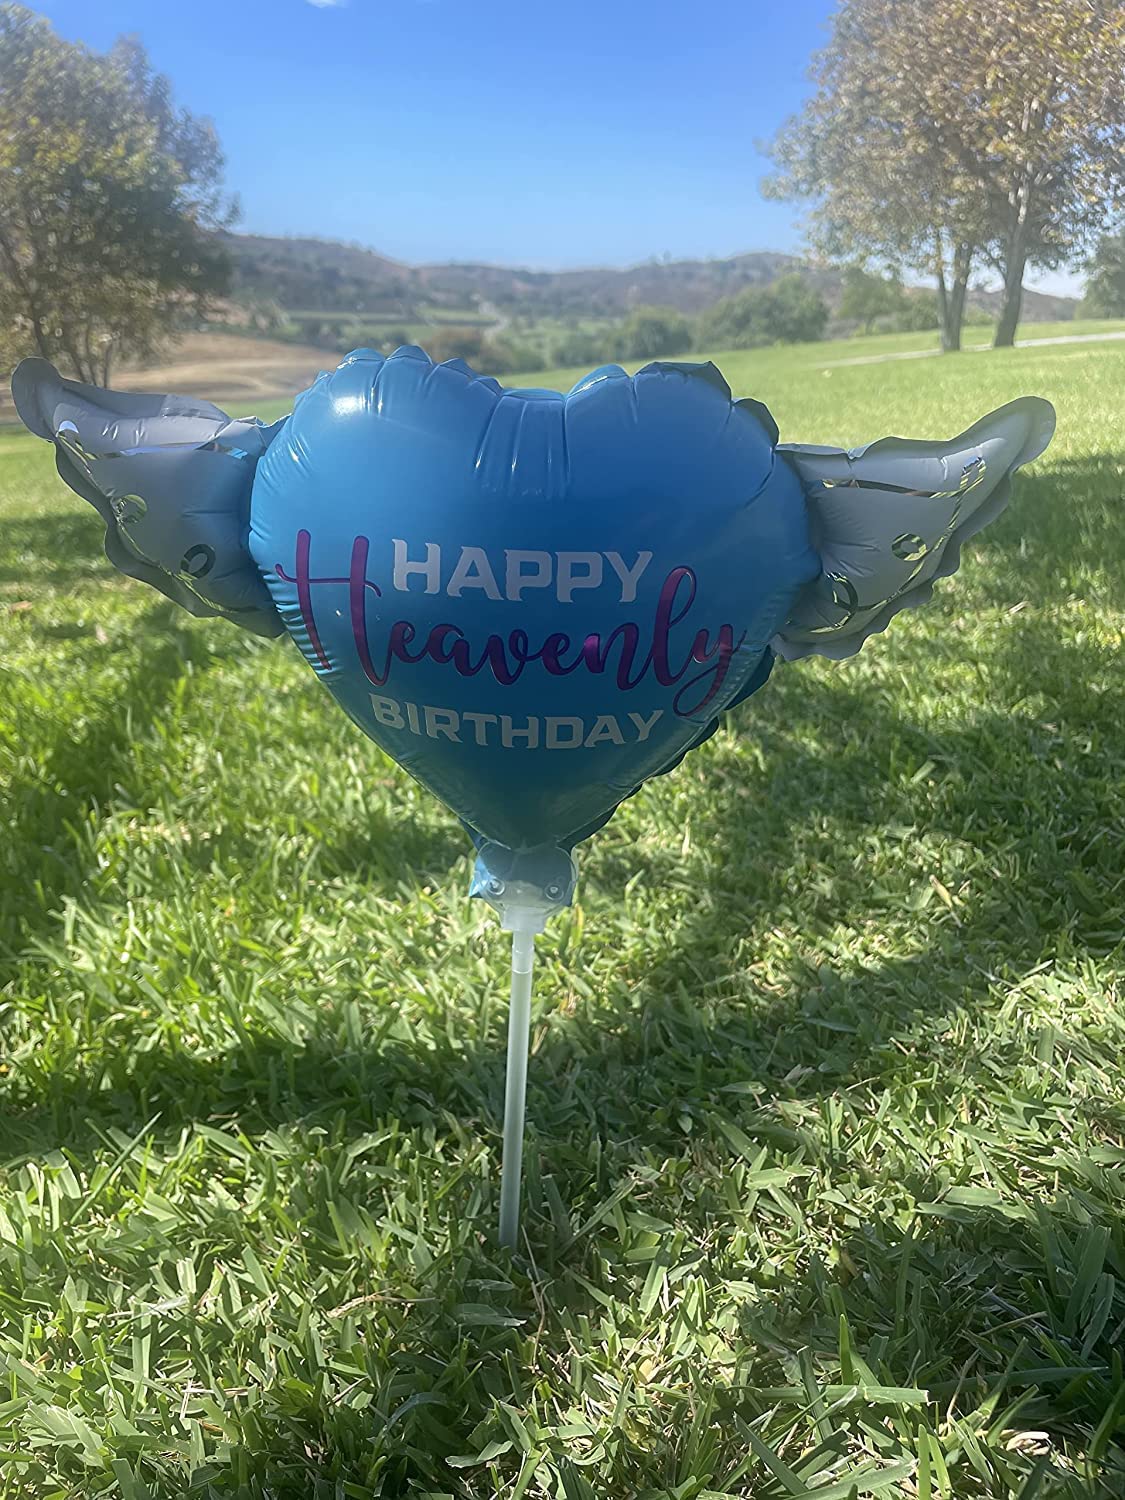 Happy Heavenly Birthday blue/purple balloons on a stick heart shaped with angel wings